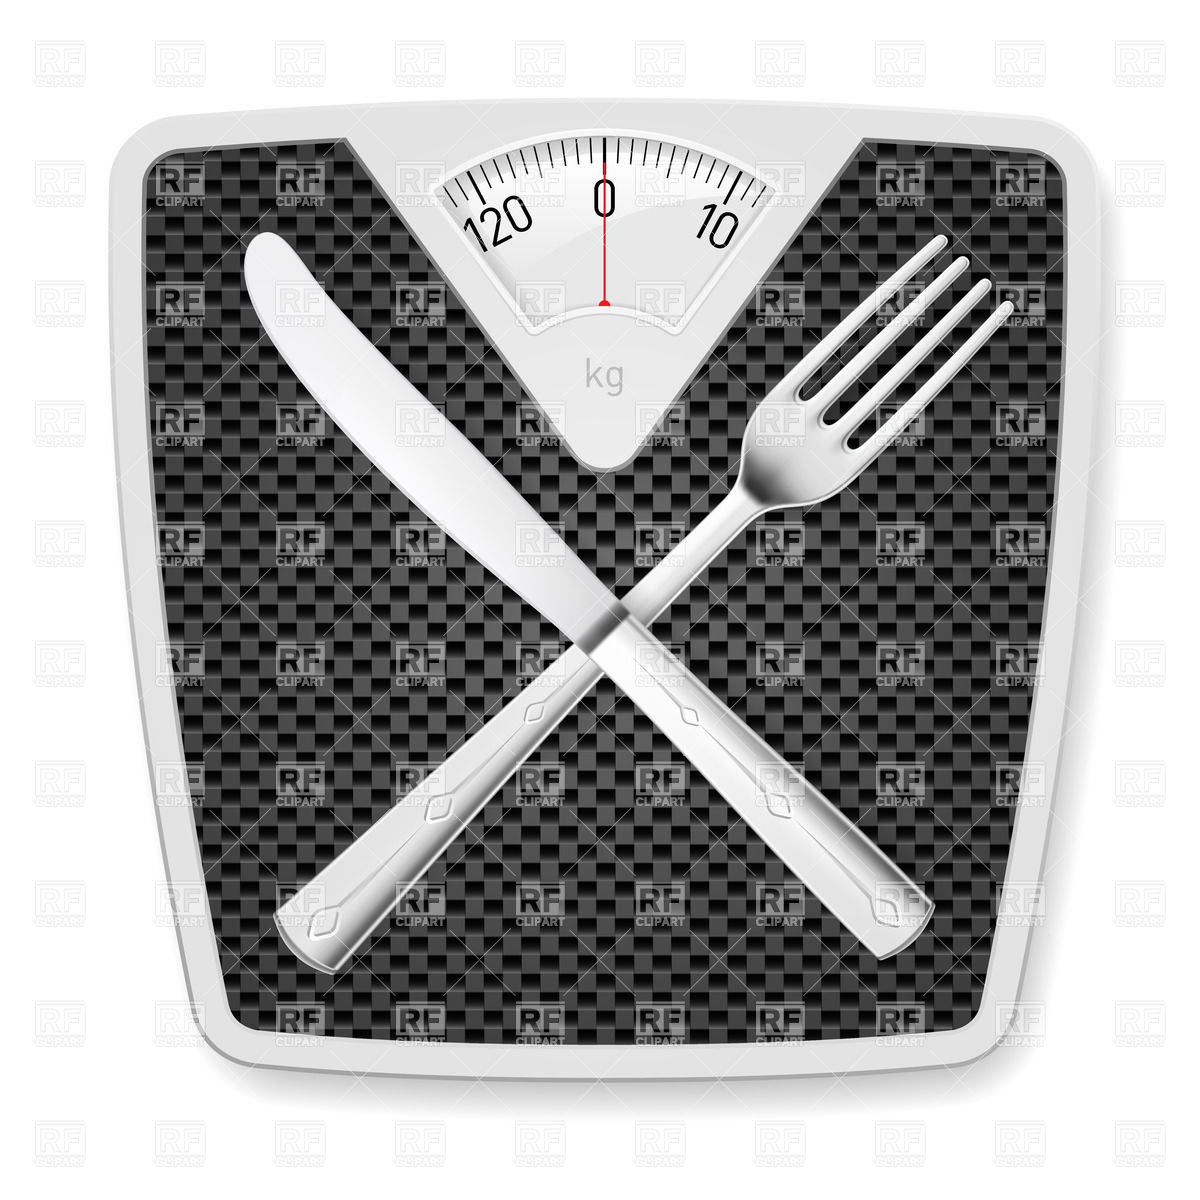 Bathroom Scales With Fork And Knife Objects Download Royalty Free